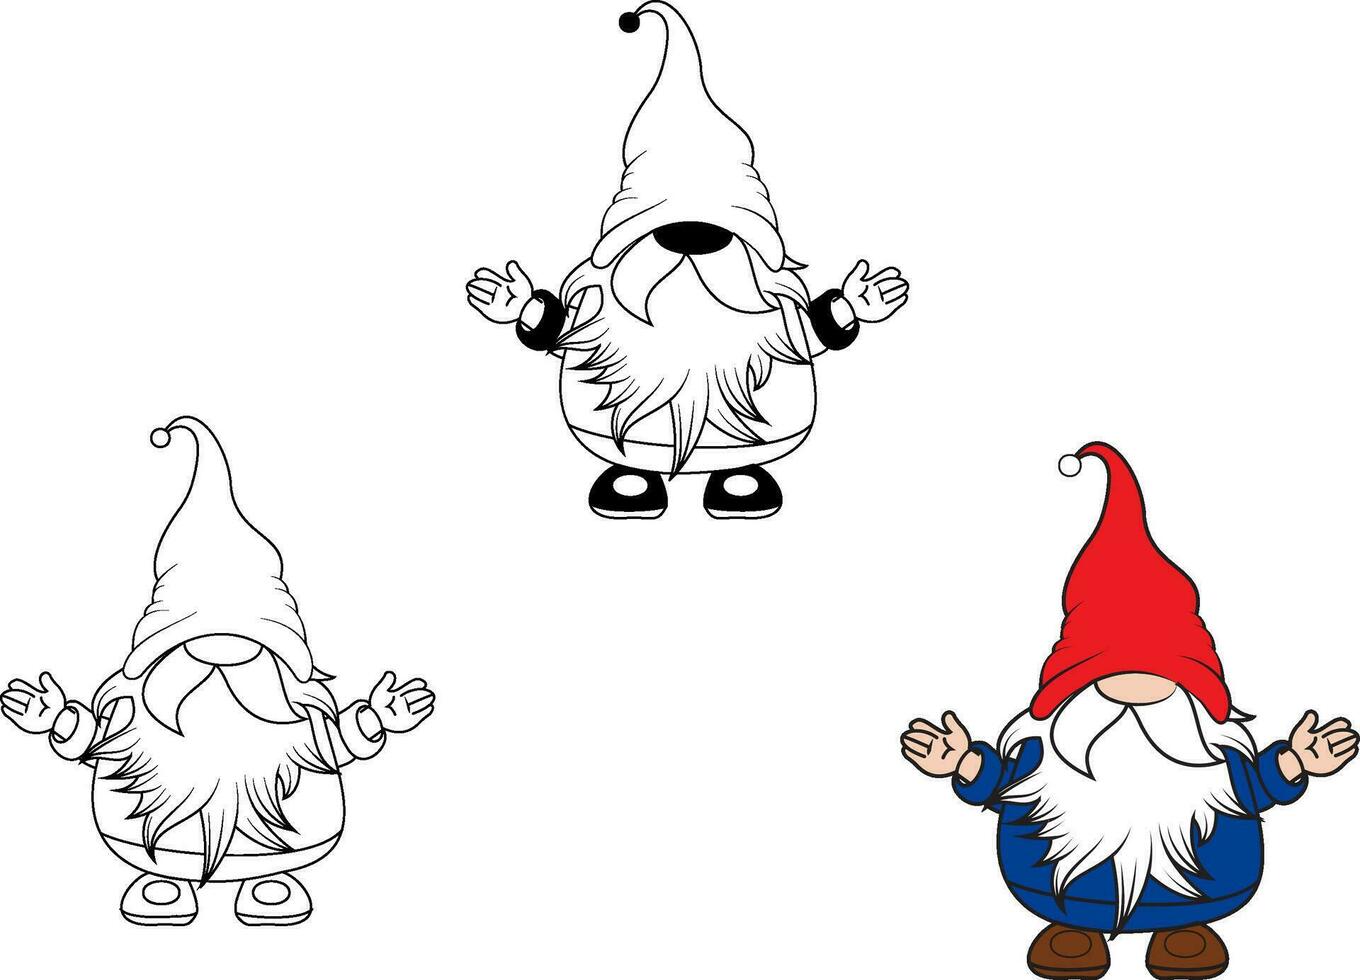 Set Of Merry Christmas With Cute Gnomes Santa Claus Banner Design. Cute Cartoon Illustration vector